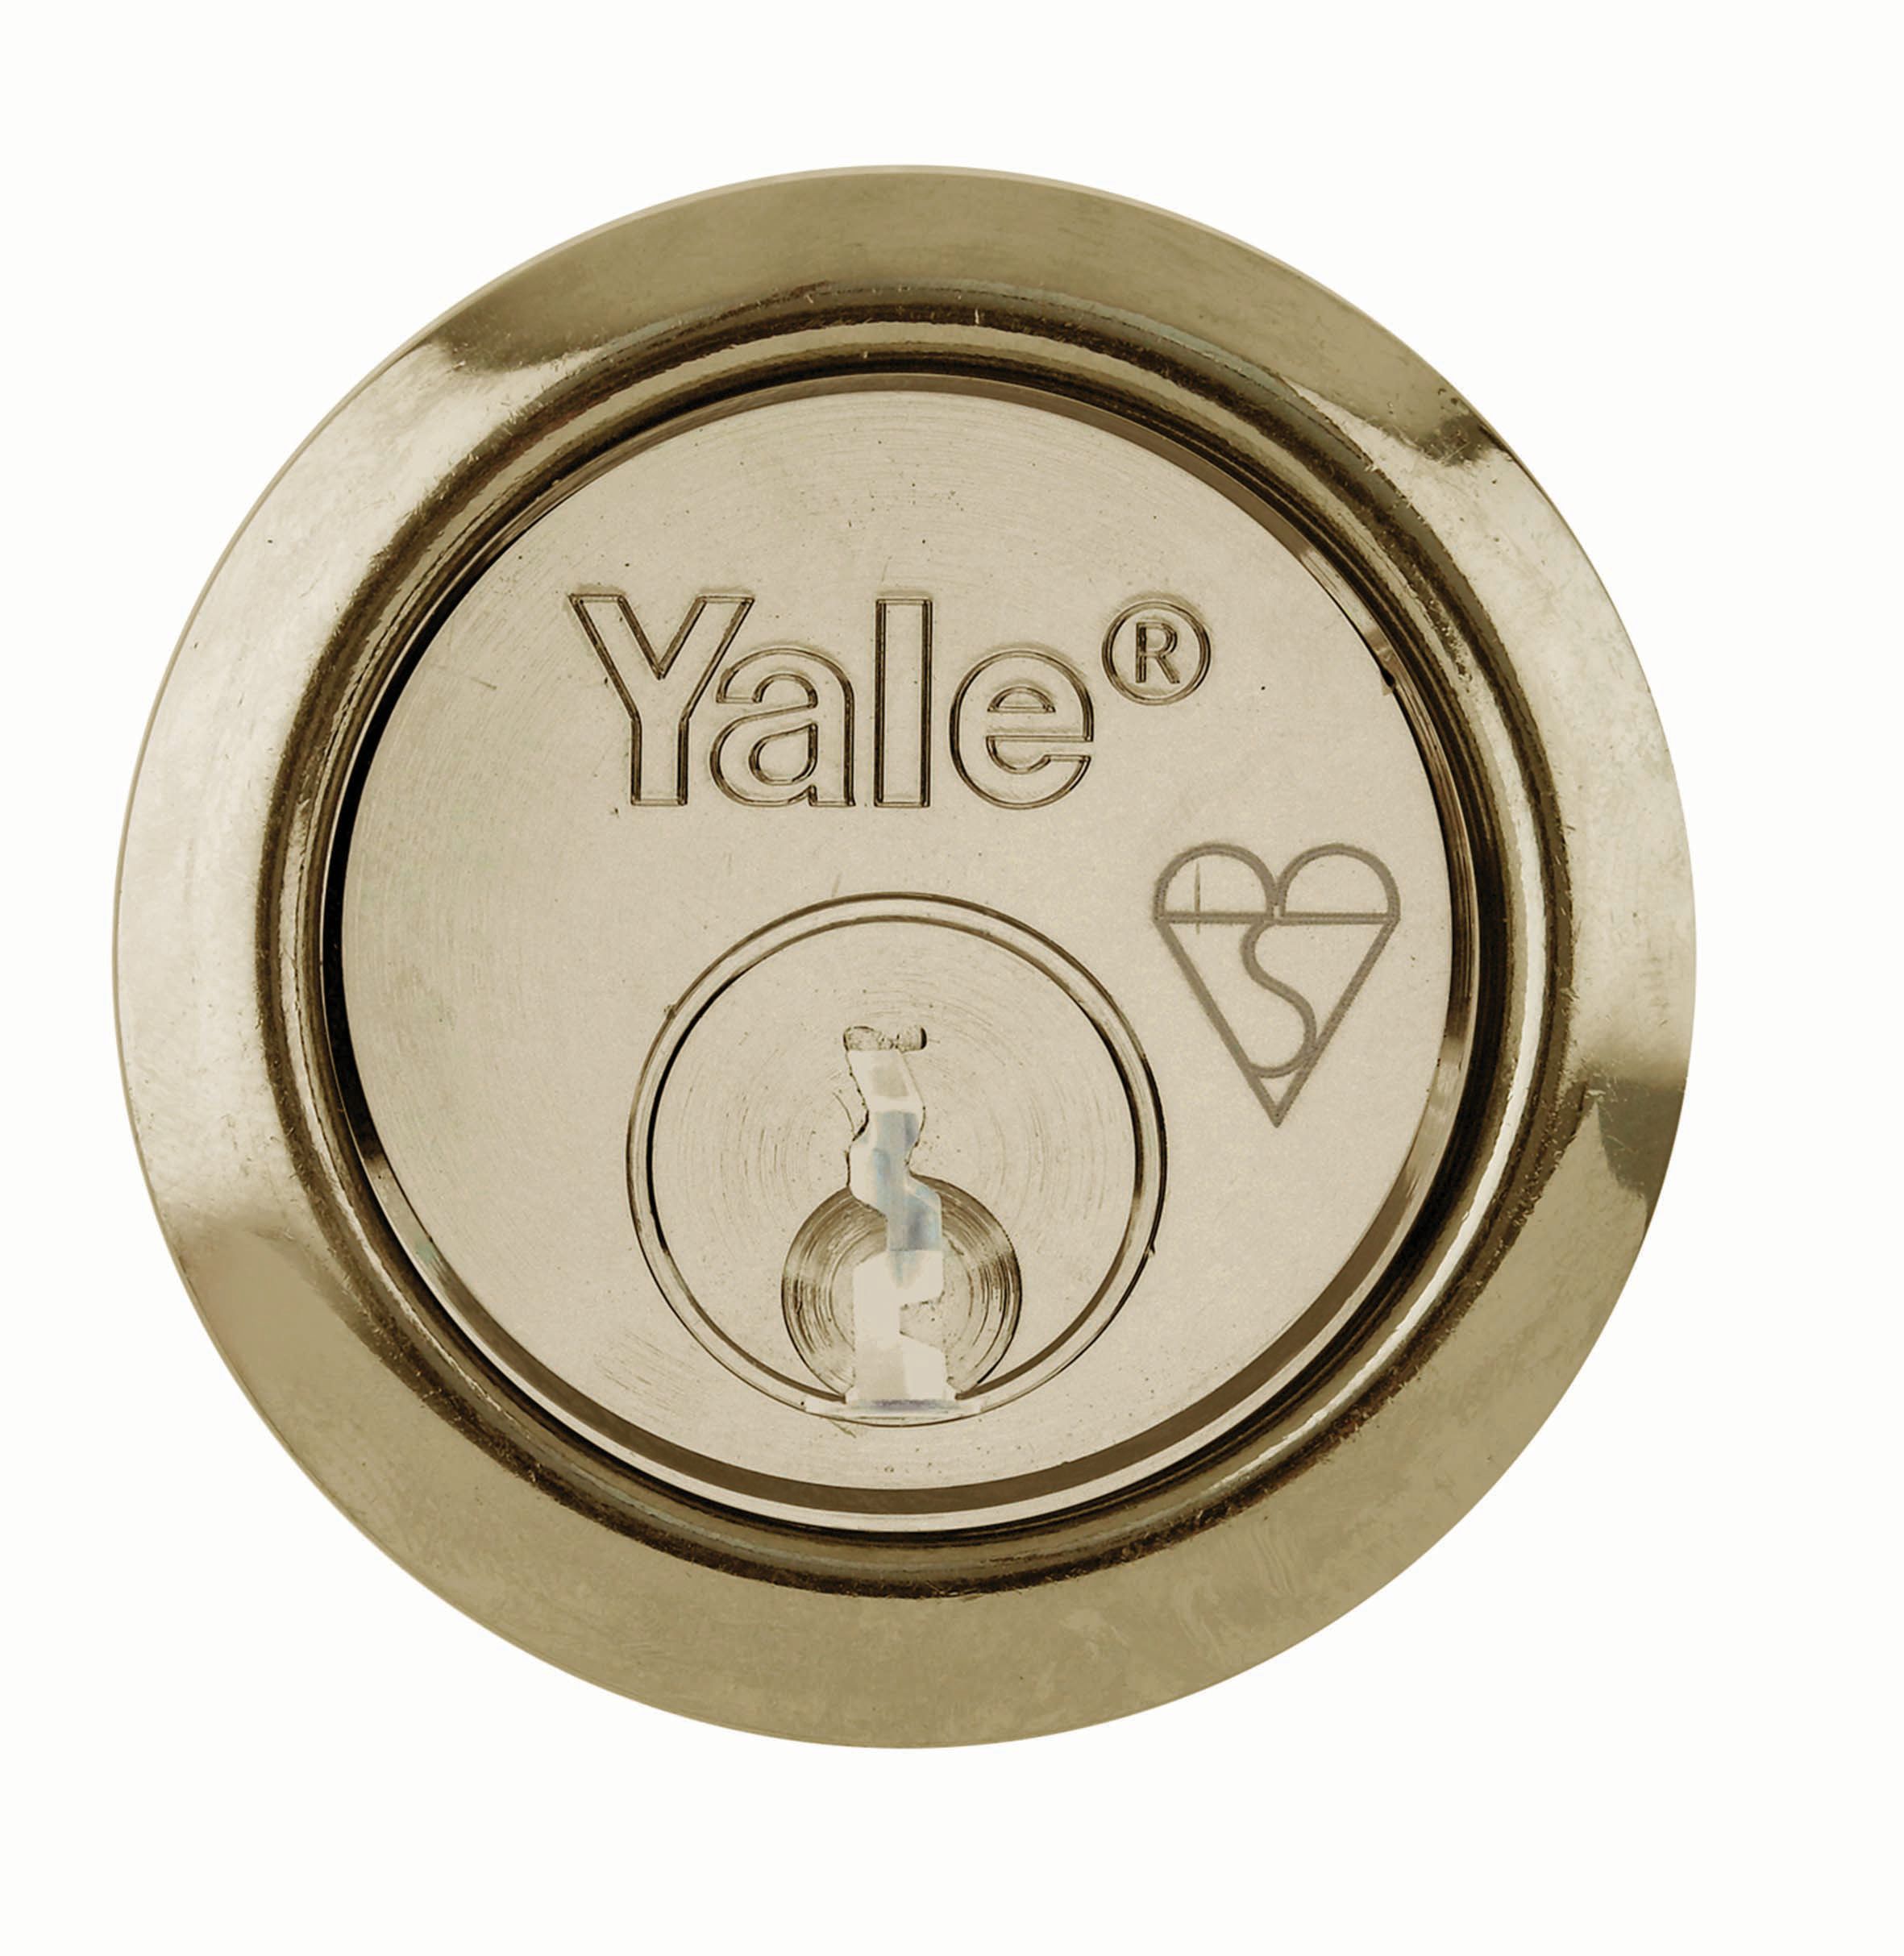 Yale X5 Kitemarked 1 Star Replacement Rim Cylinder Lock - Polished Brass